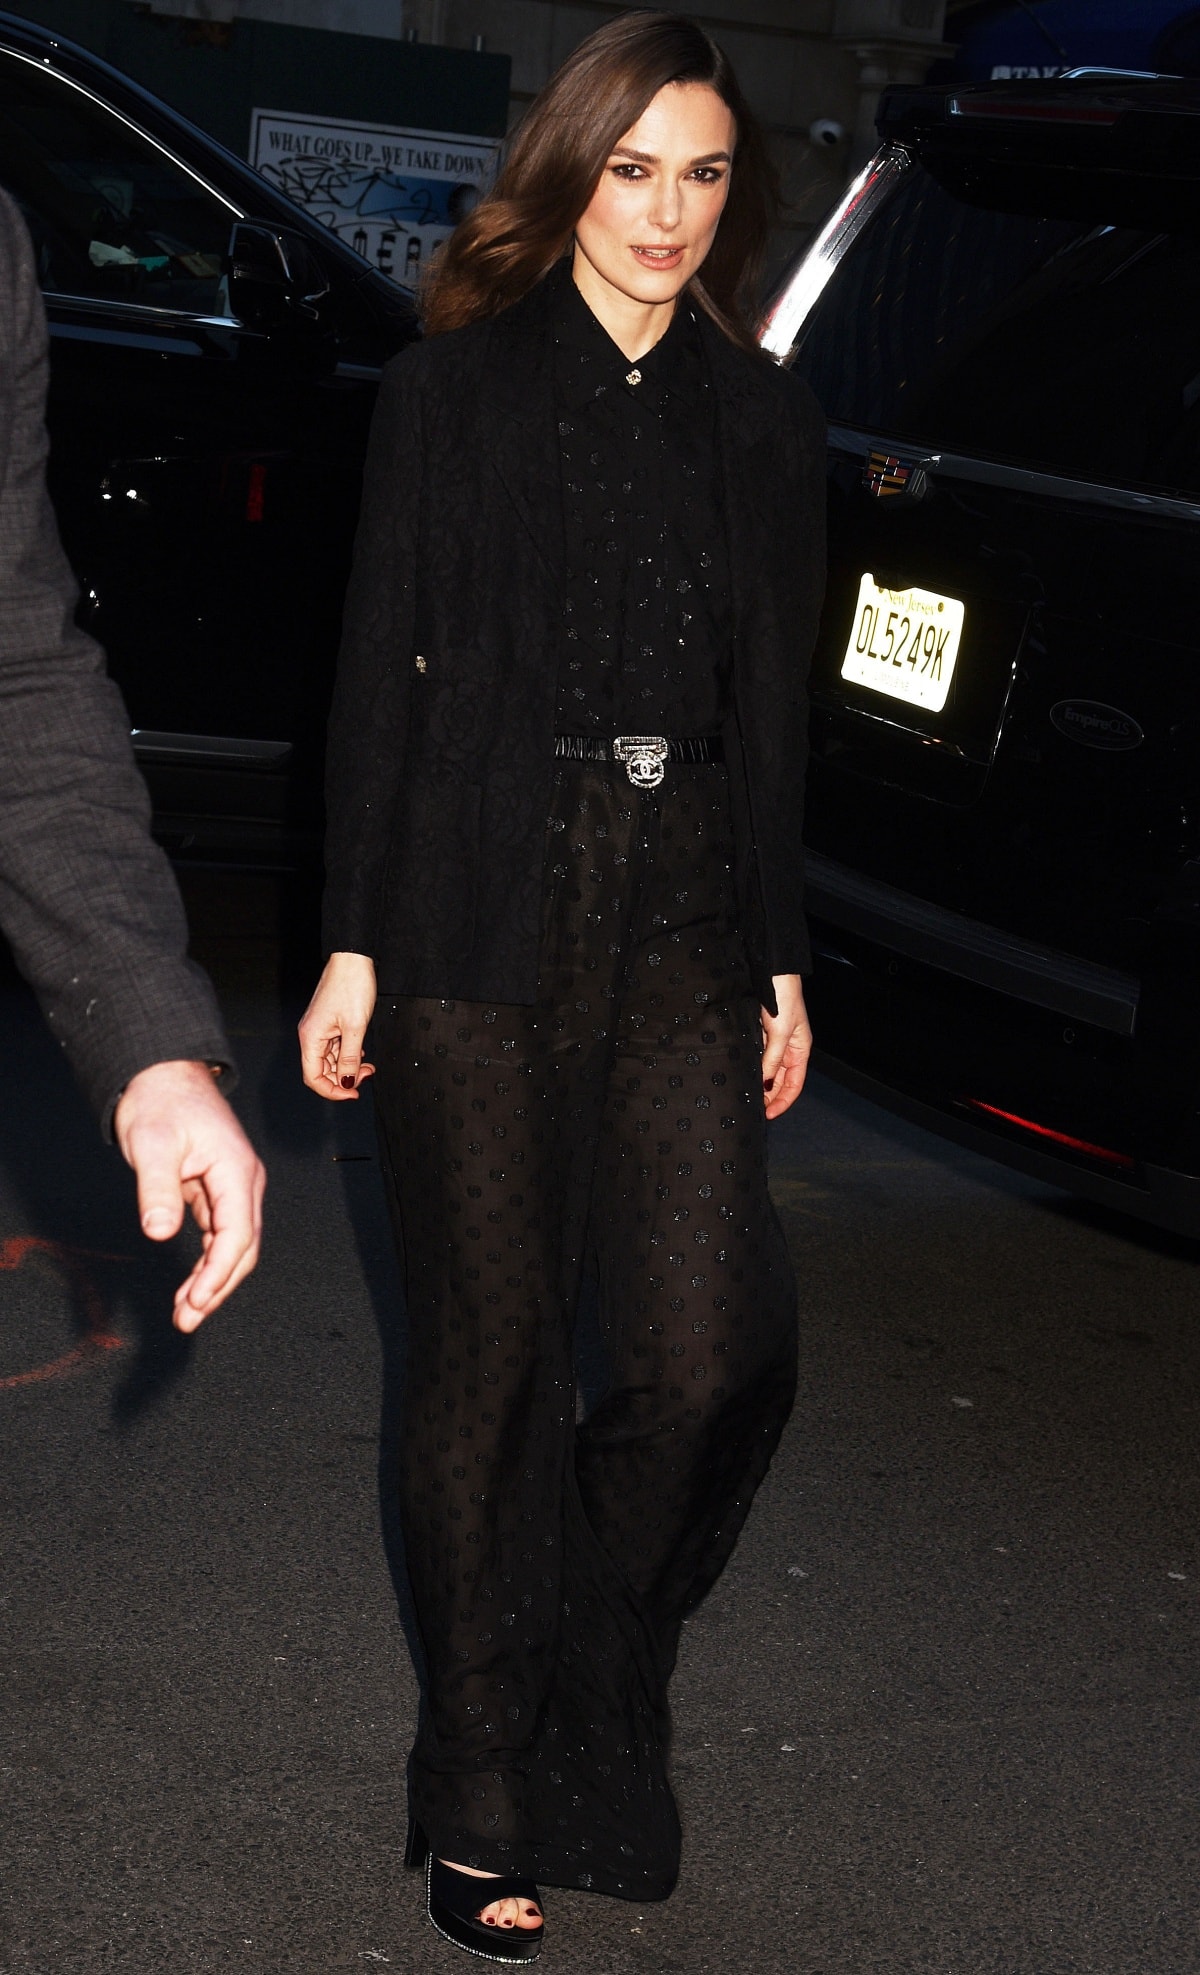 Keira Knightley arriving at her hotel after her guest appearance on The Tonight Show Starring Jimmy Fallon